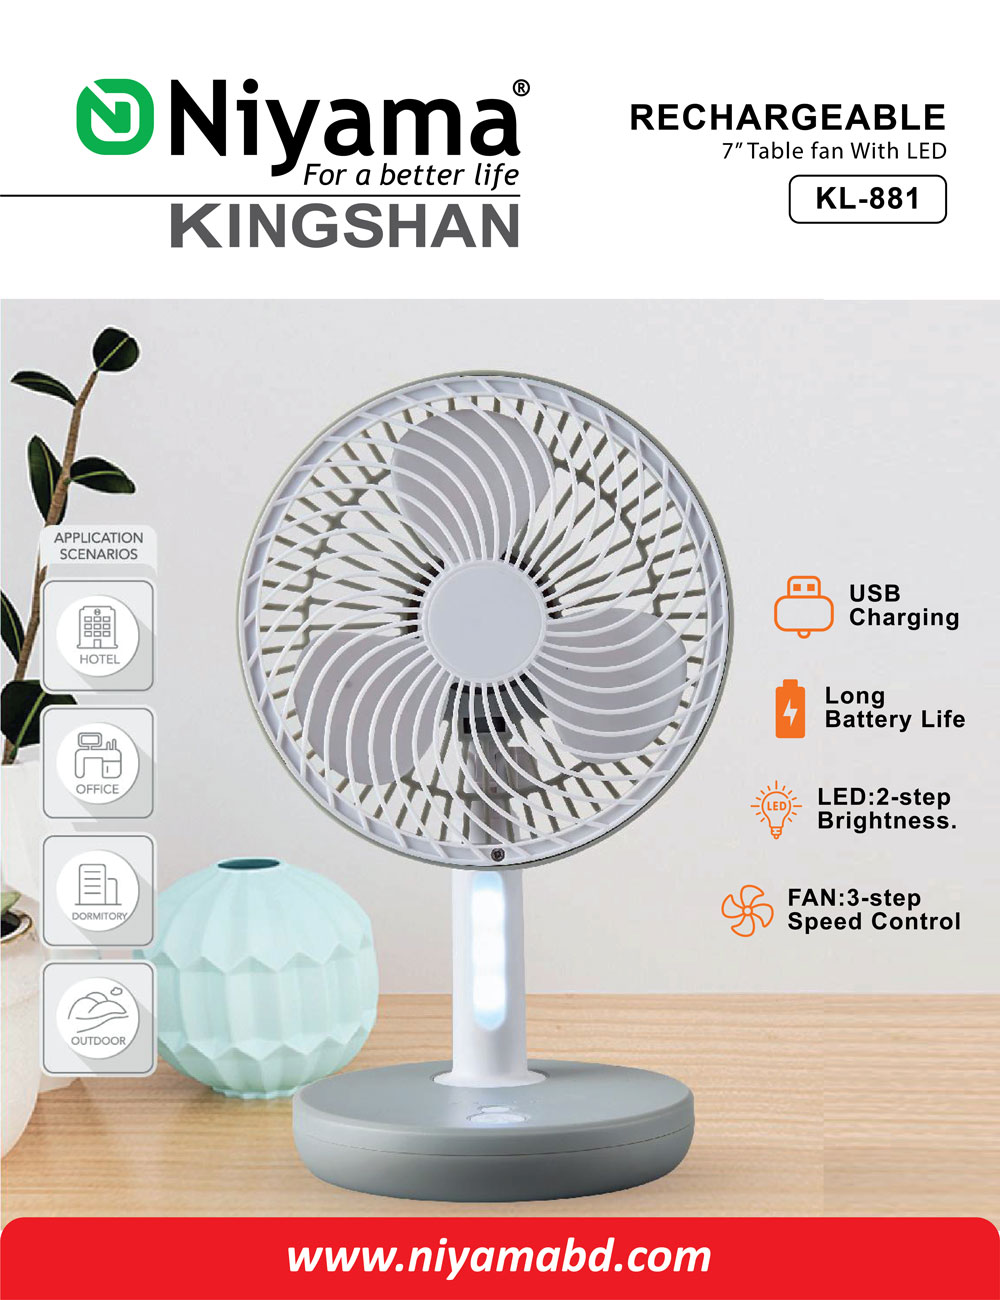 Stay Cool Anywhere You Go with the KL-881 Rechargeable Mini Fan!